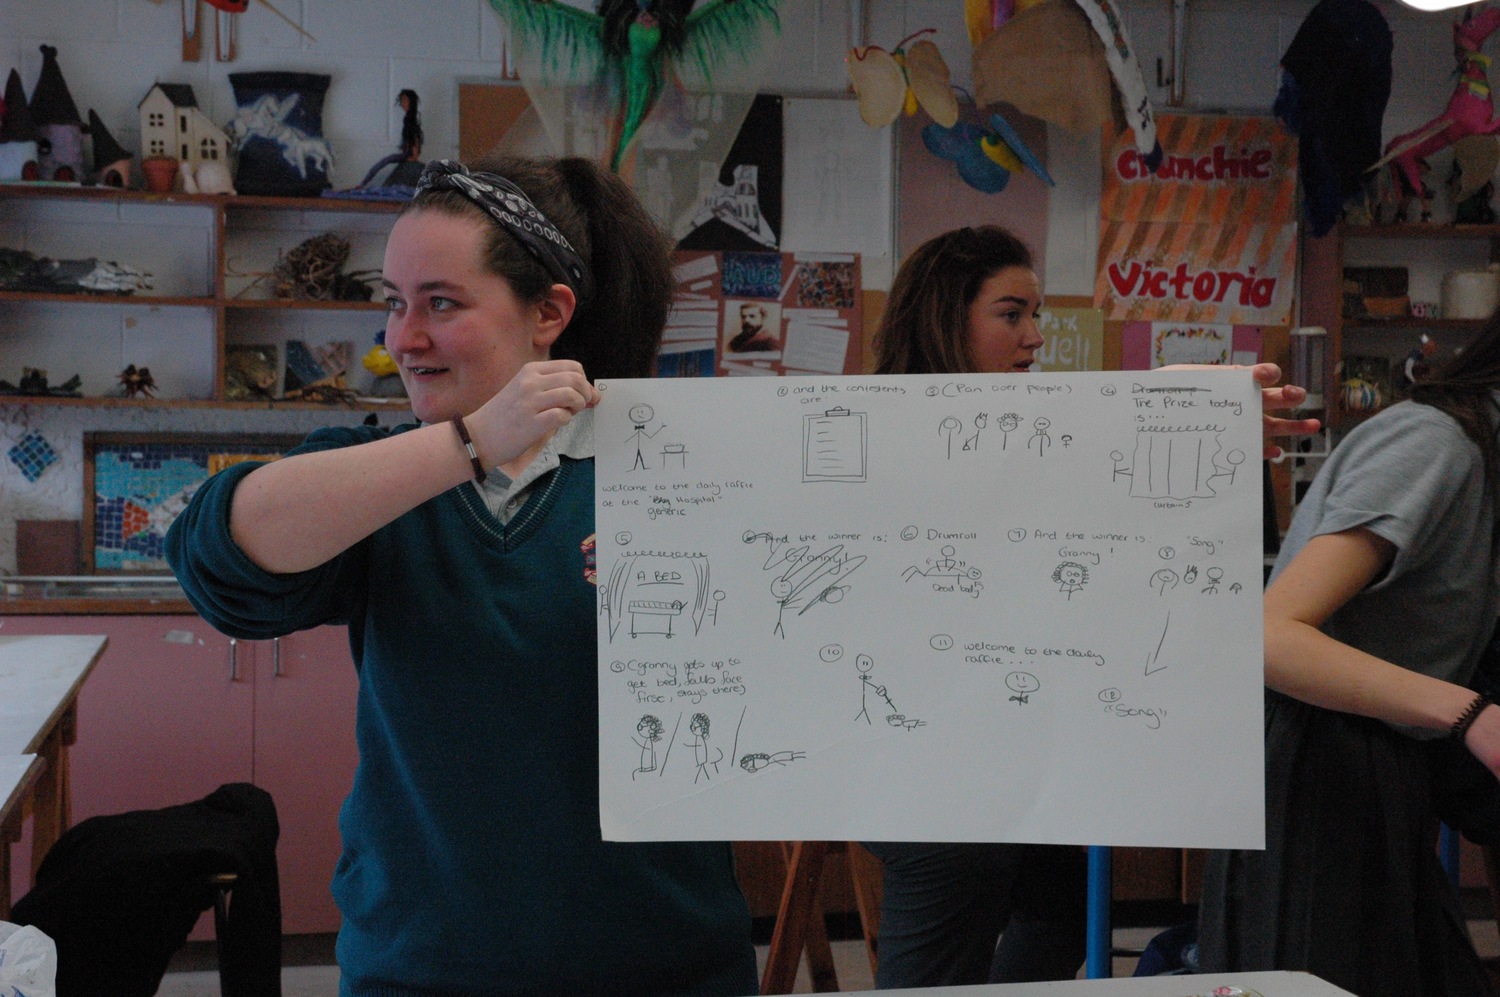  Students and Clodagh used story-boarding, musical composition, choreography, special effects, prop-building and performance to create an impressive drama 